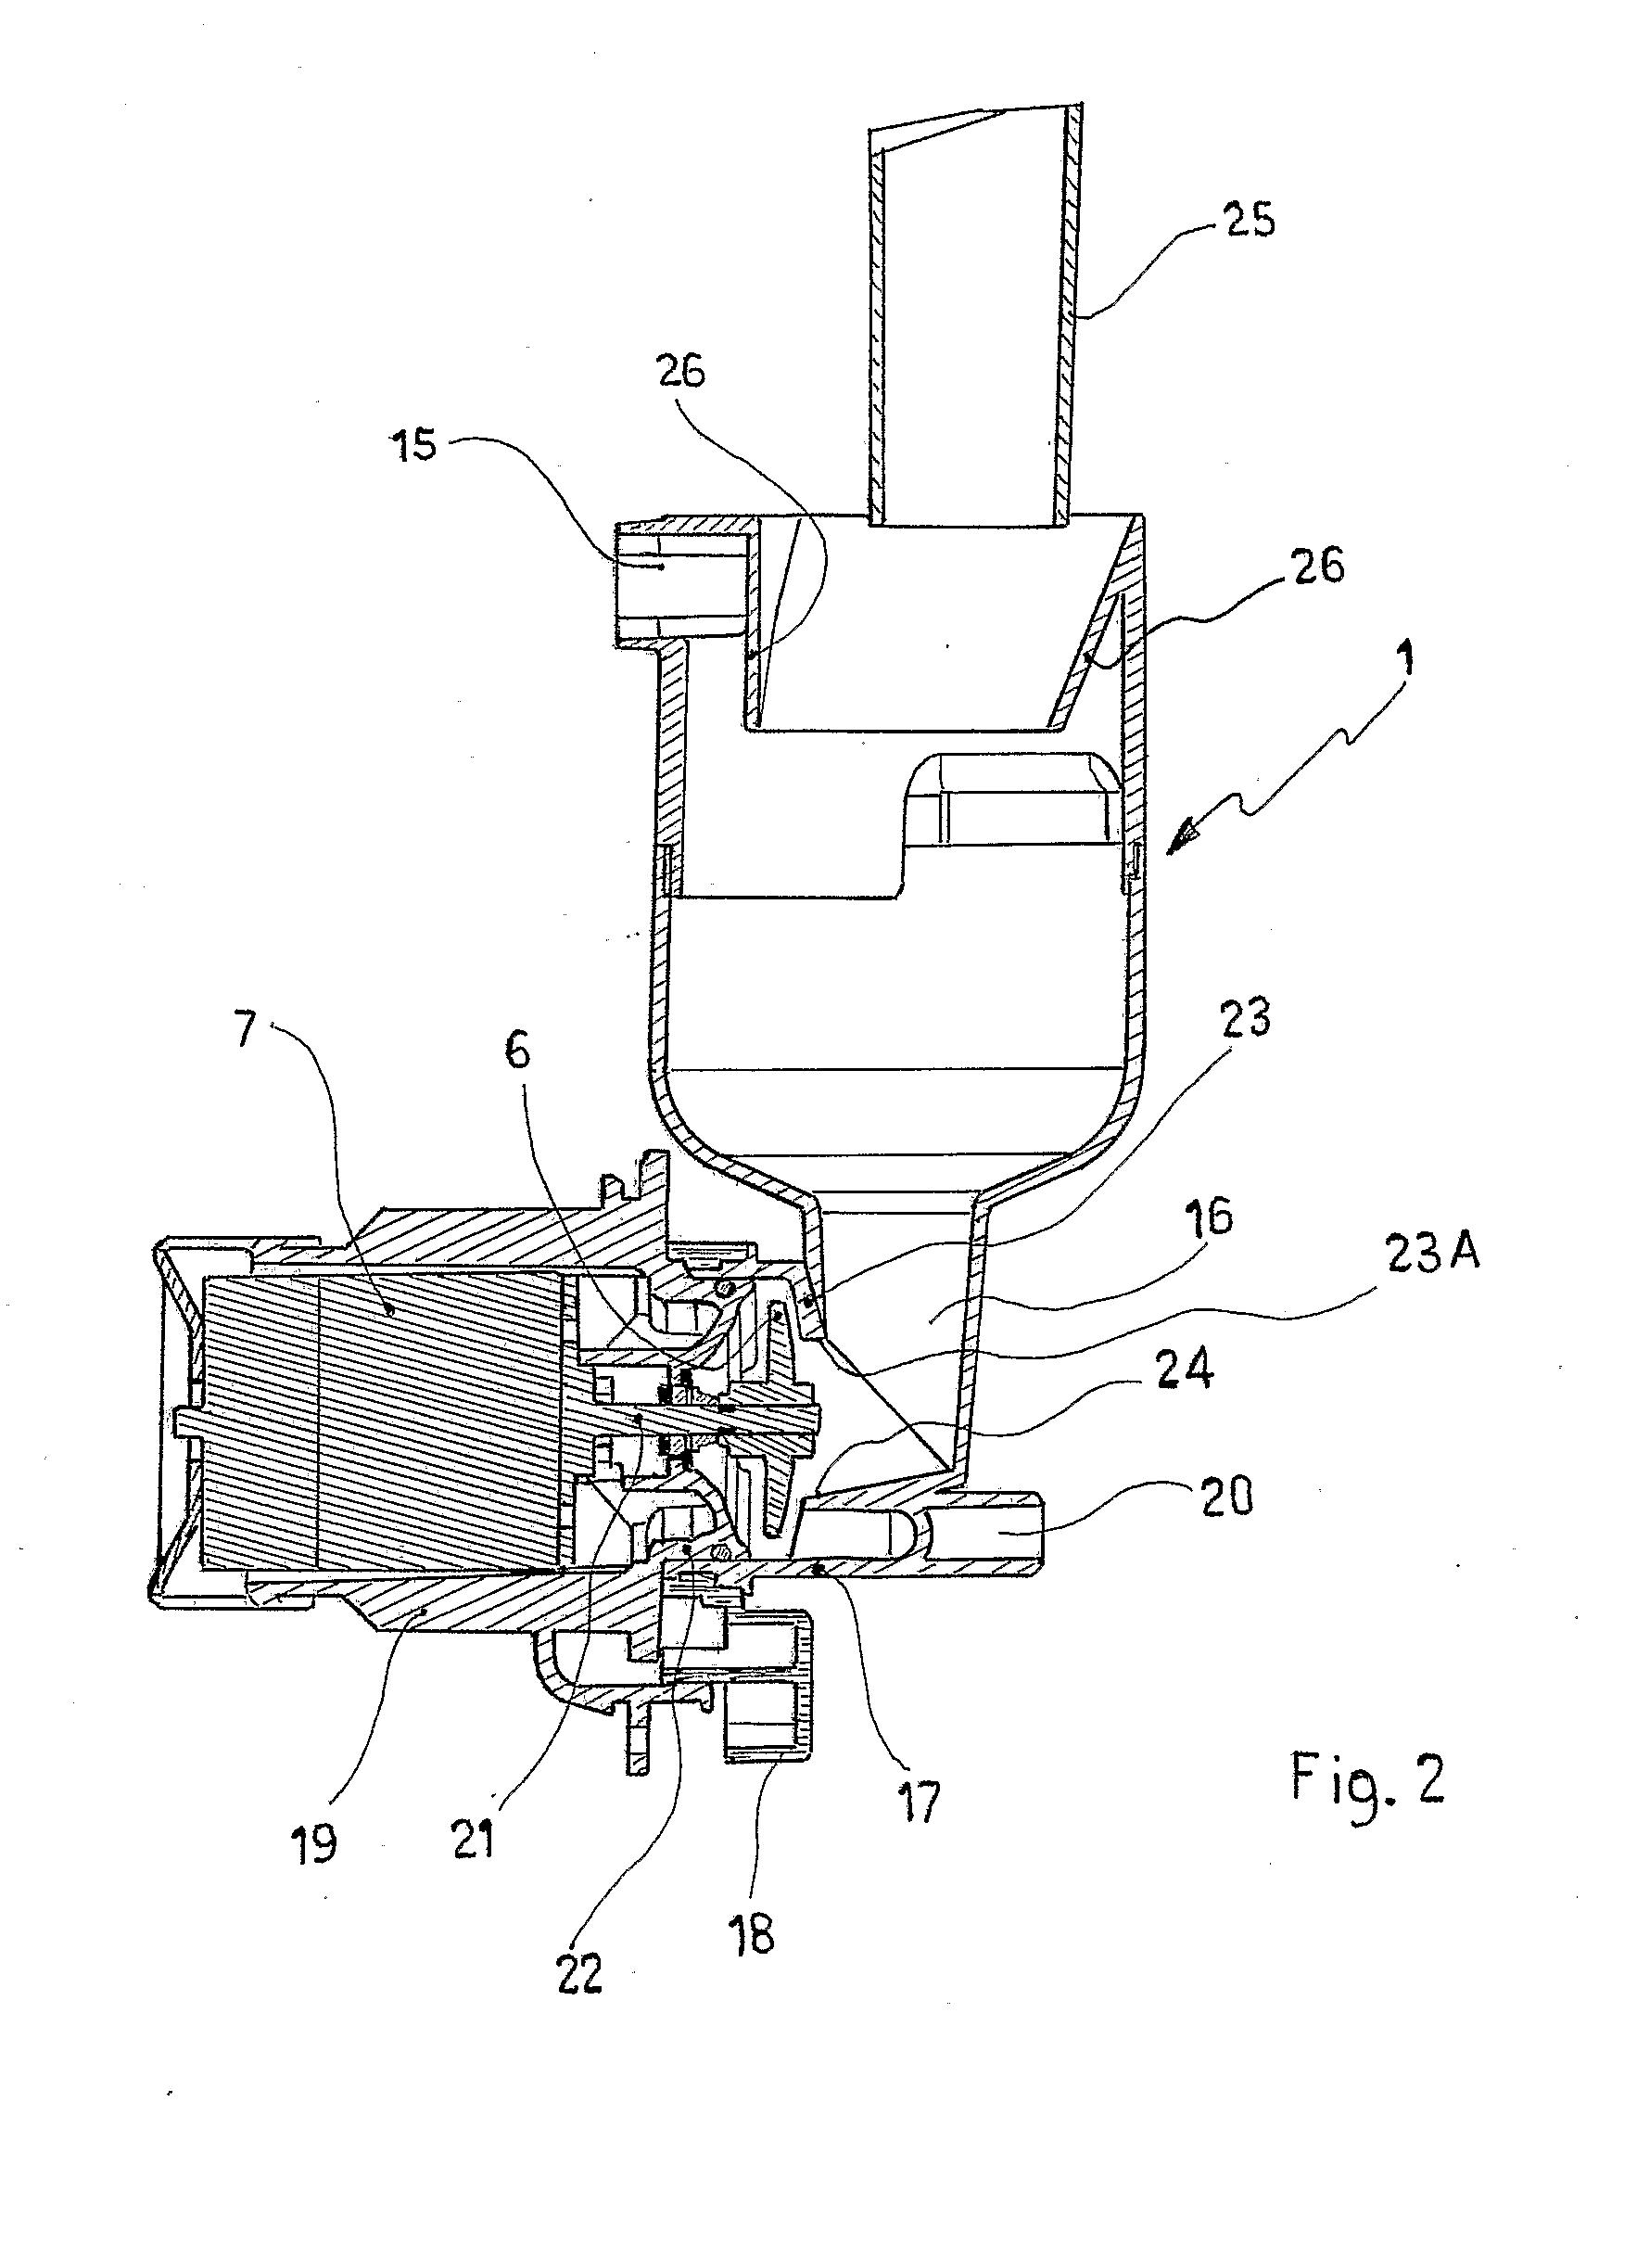 Method and Apparatus for Preparing Beverages from Soluble Products